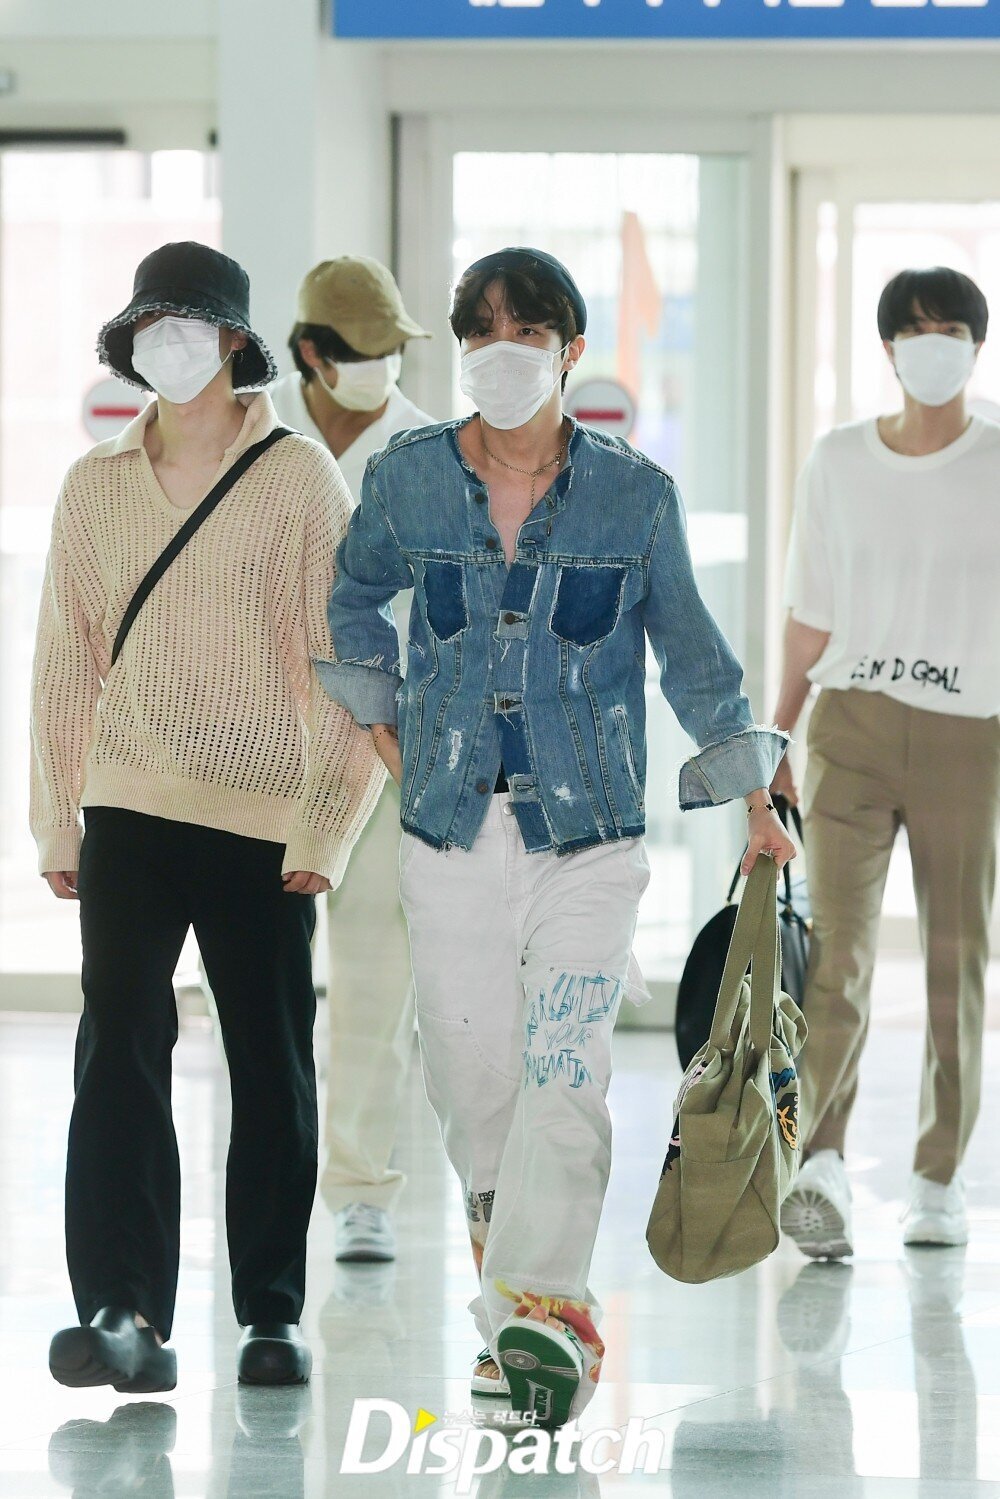 5 airport outfits of BTS' J-hope that cemented his status as one